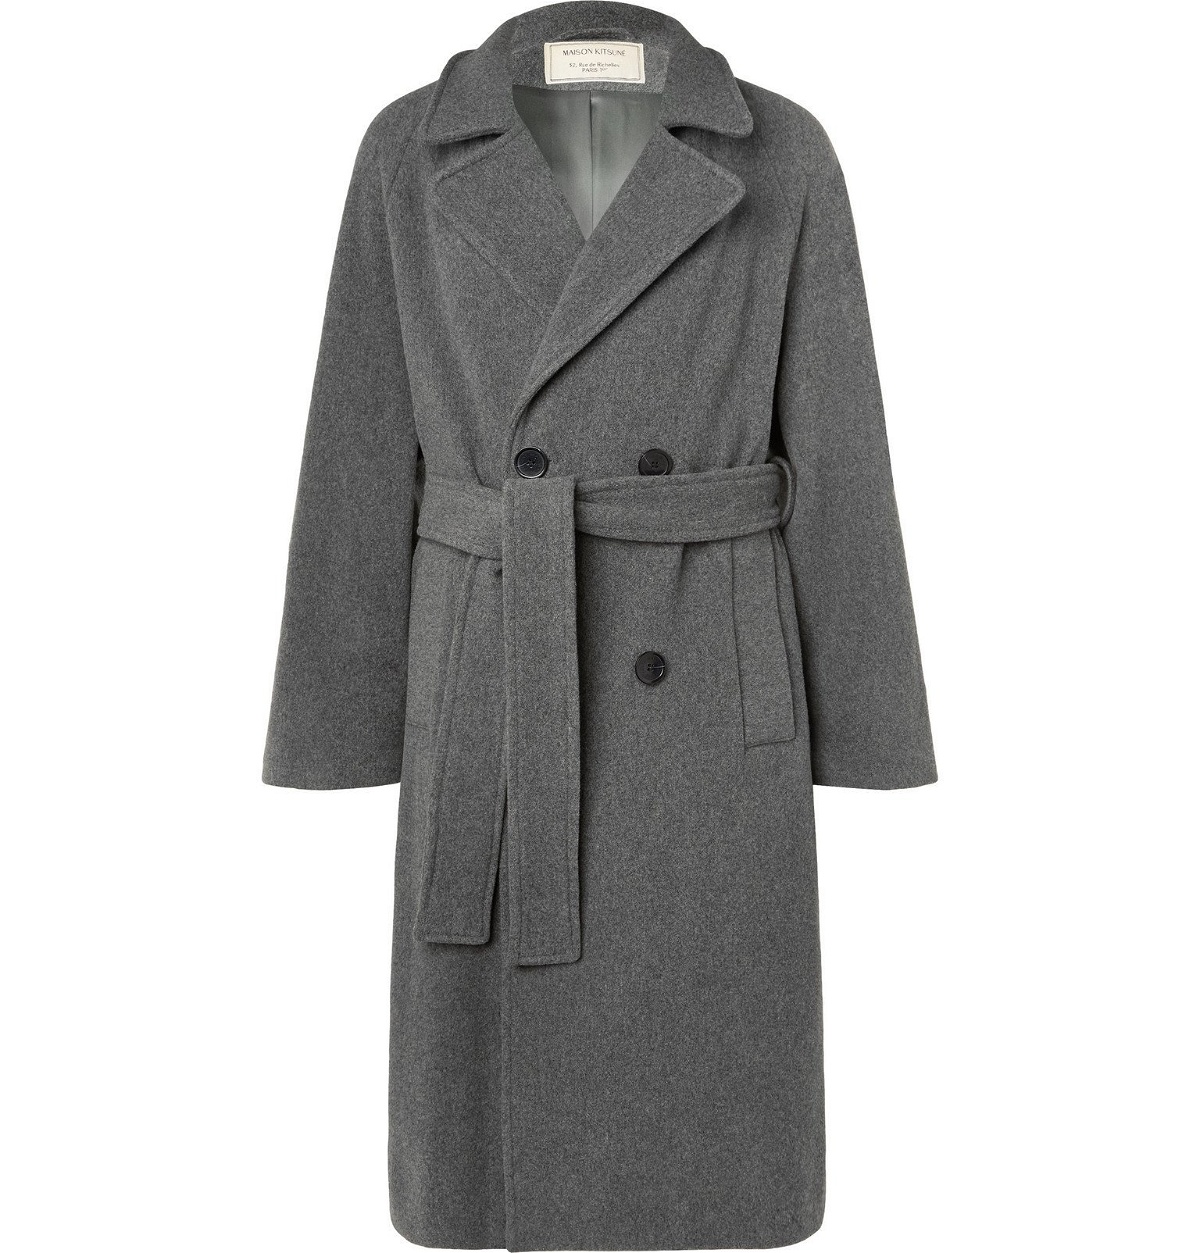 Maison Kitsuné - Oversized Belted Double-Breasted Wool-Blend Coat 